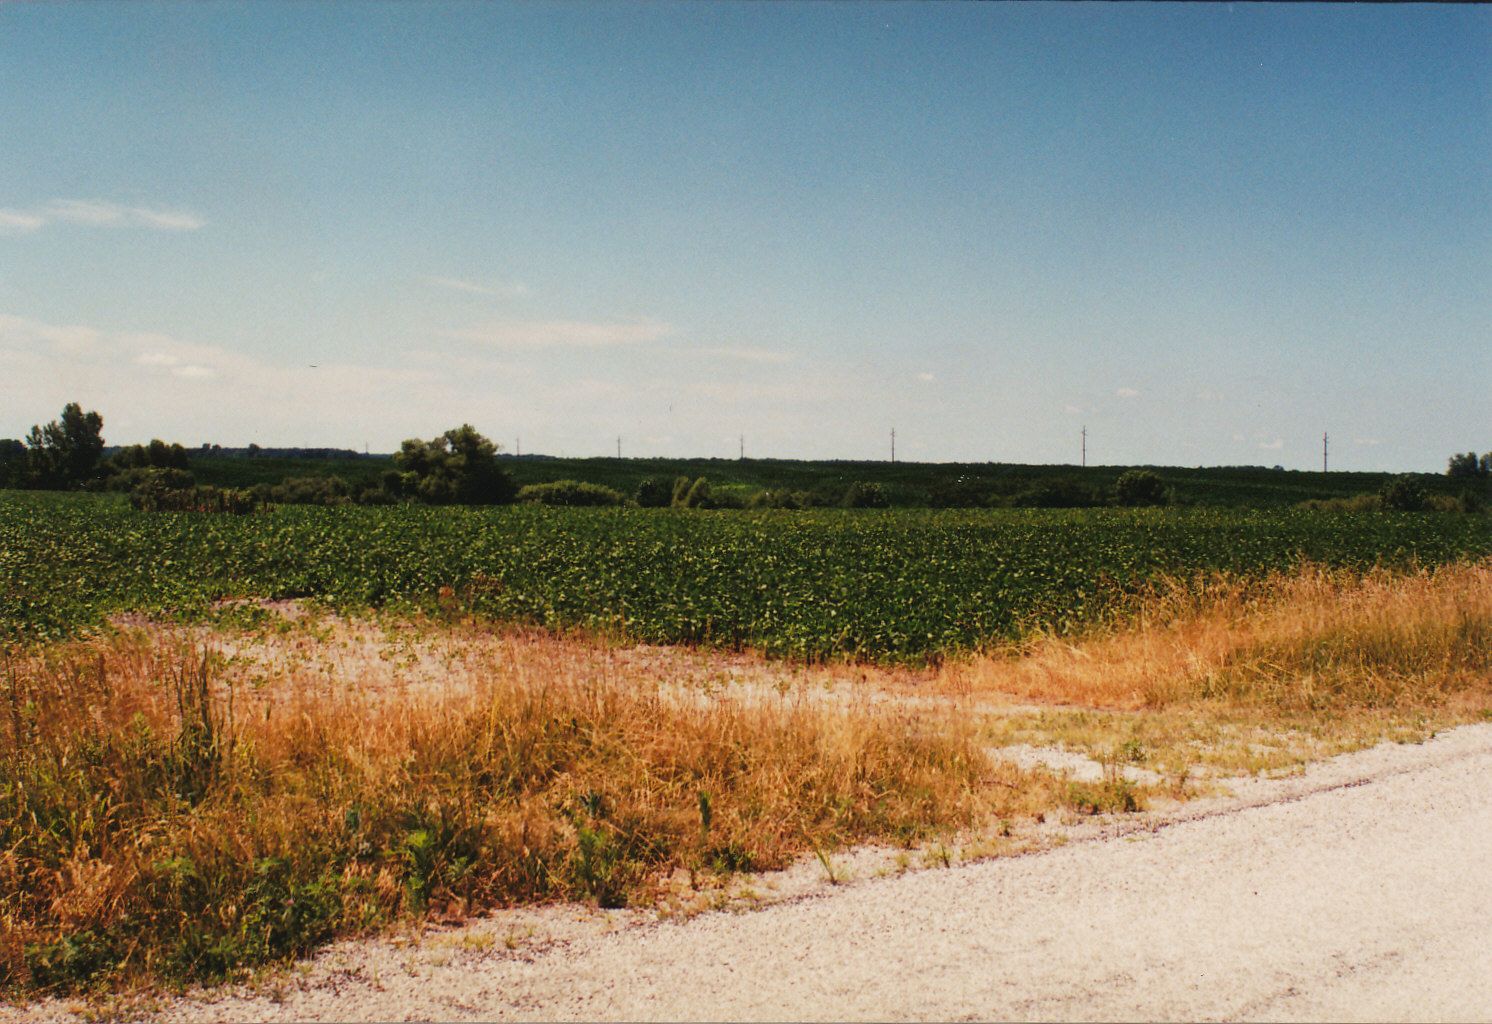 This photo was taken in 2002, and it shows that all the remains of John McMillans Gladstone is a little dip in the soil and a short piece of driveway.  